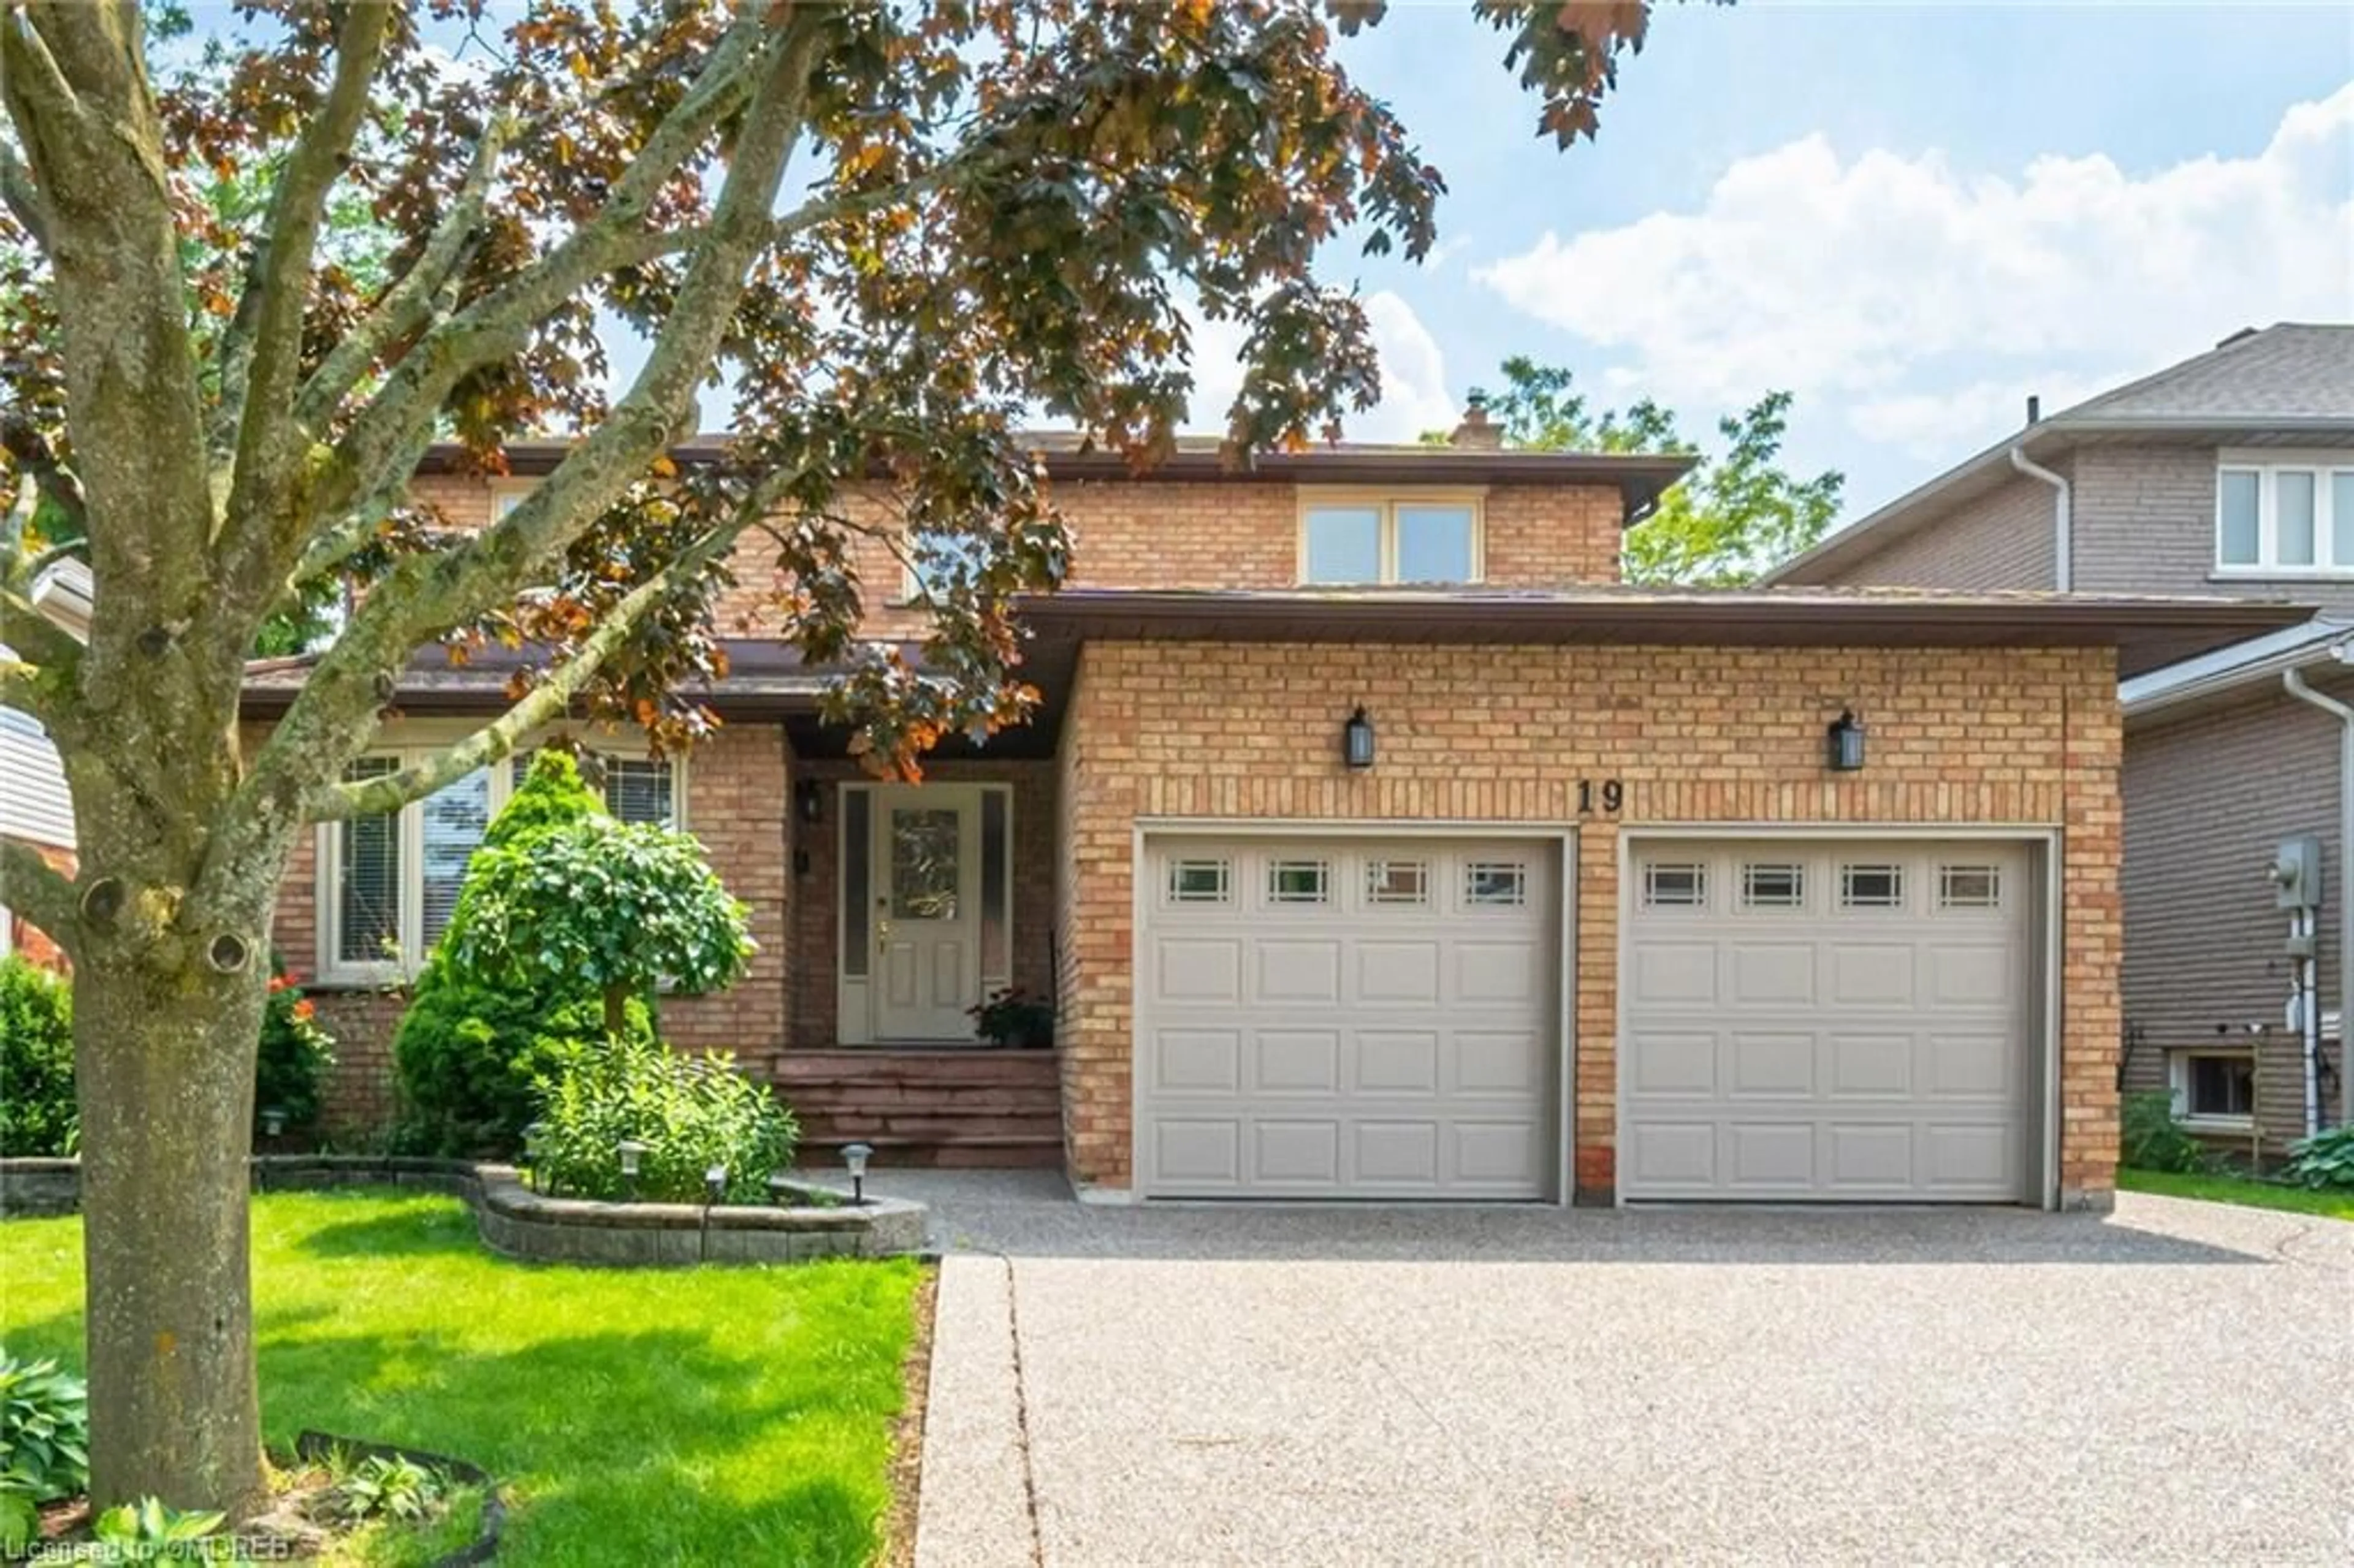 Home with brick exterior material for 19 Caswell Dr, Hamilton Ontario L9C 7N2